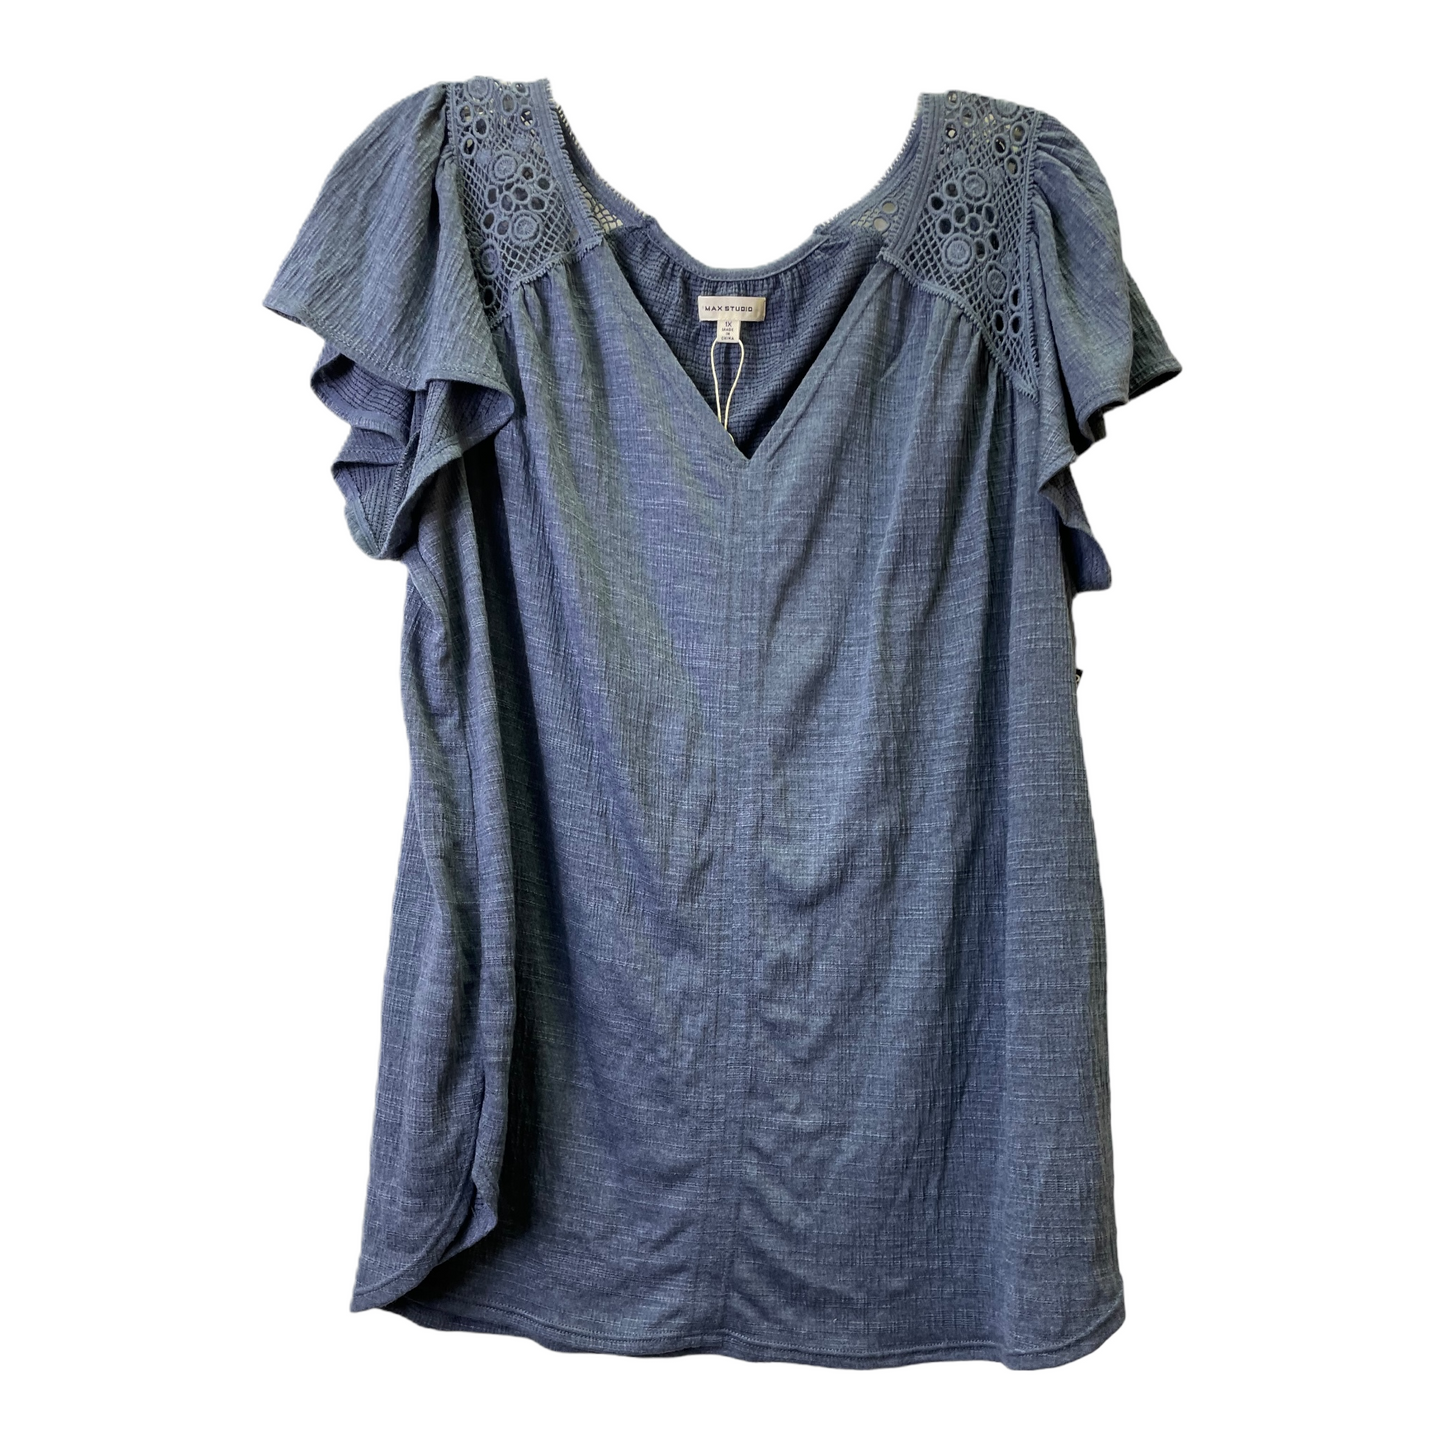 Blue Top Short Sleeve By Max Studio, Size: 1x